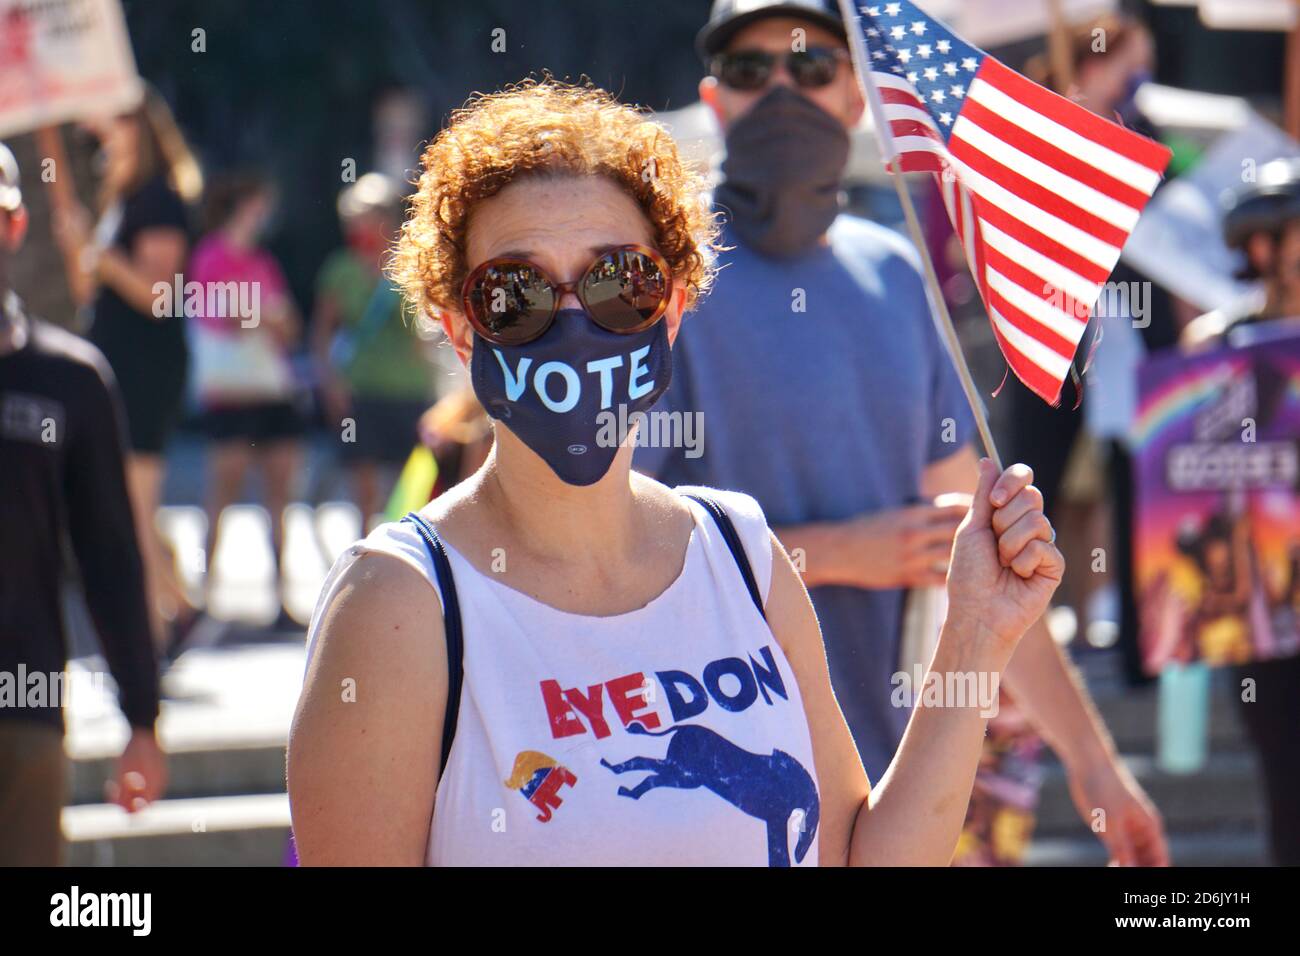 October 17, 2020. San Francisco Women's March. Biden voter wears Vote mask, a Bye Don t-shirt, and holds an American flag shortly before USA Election. Stock Photo